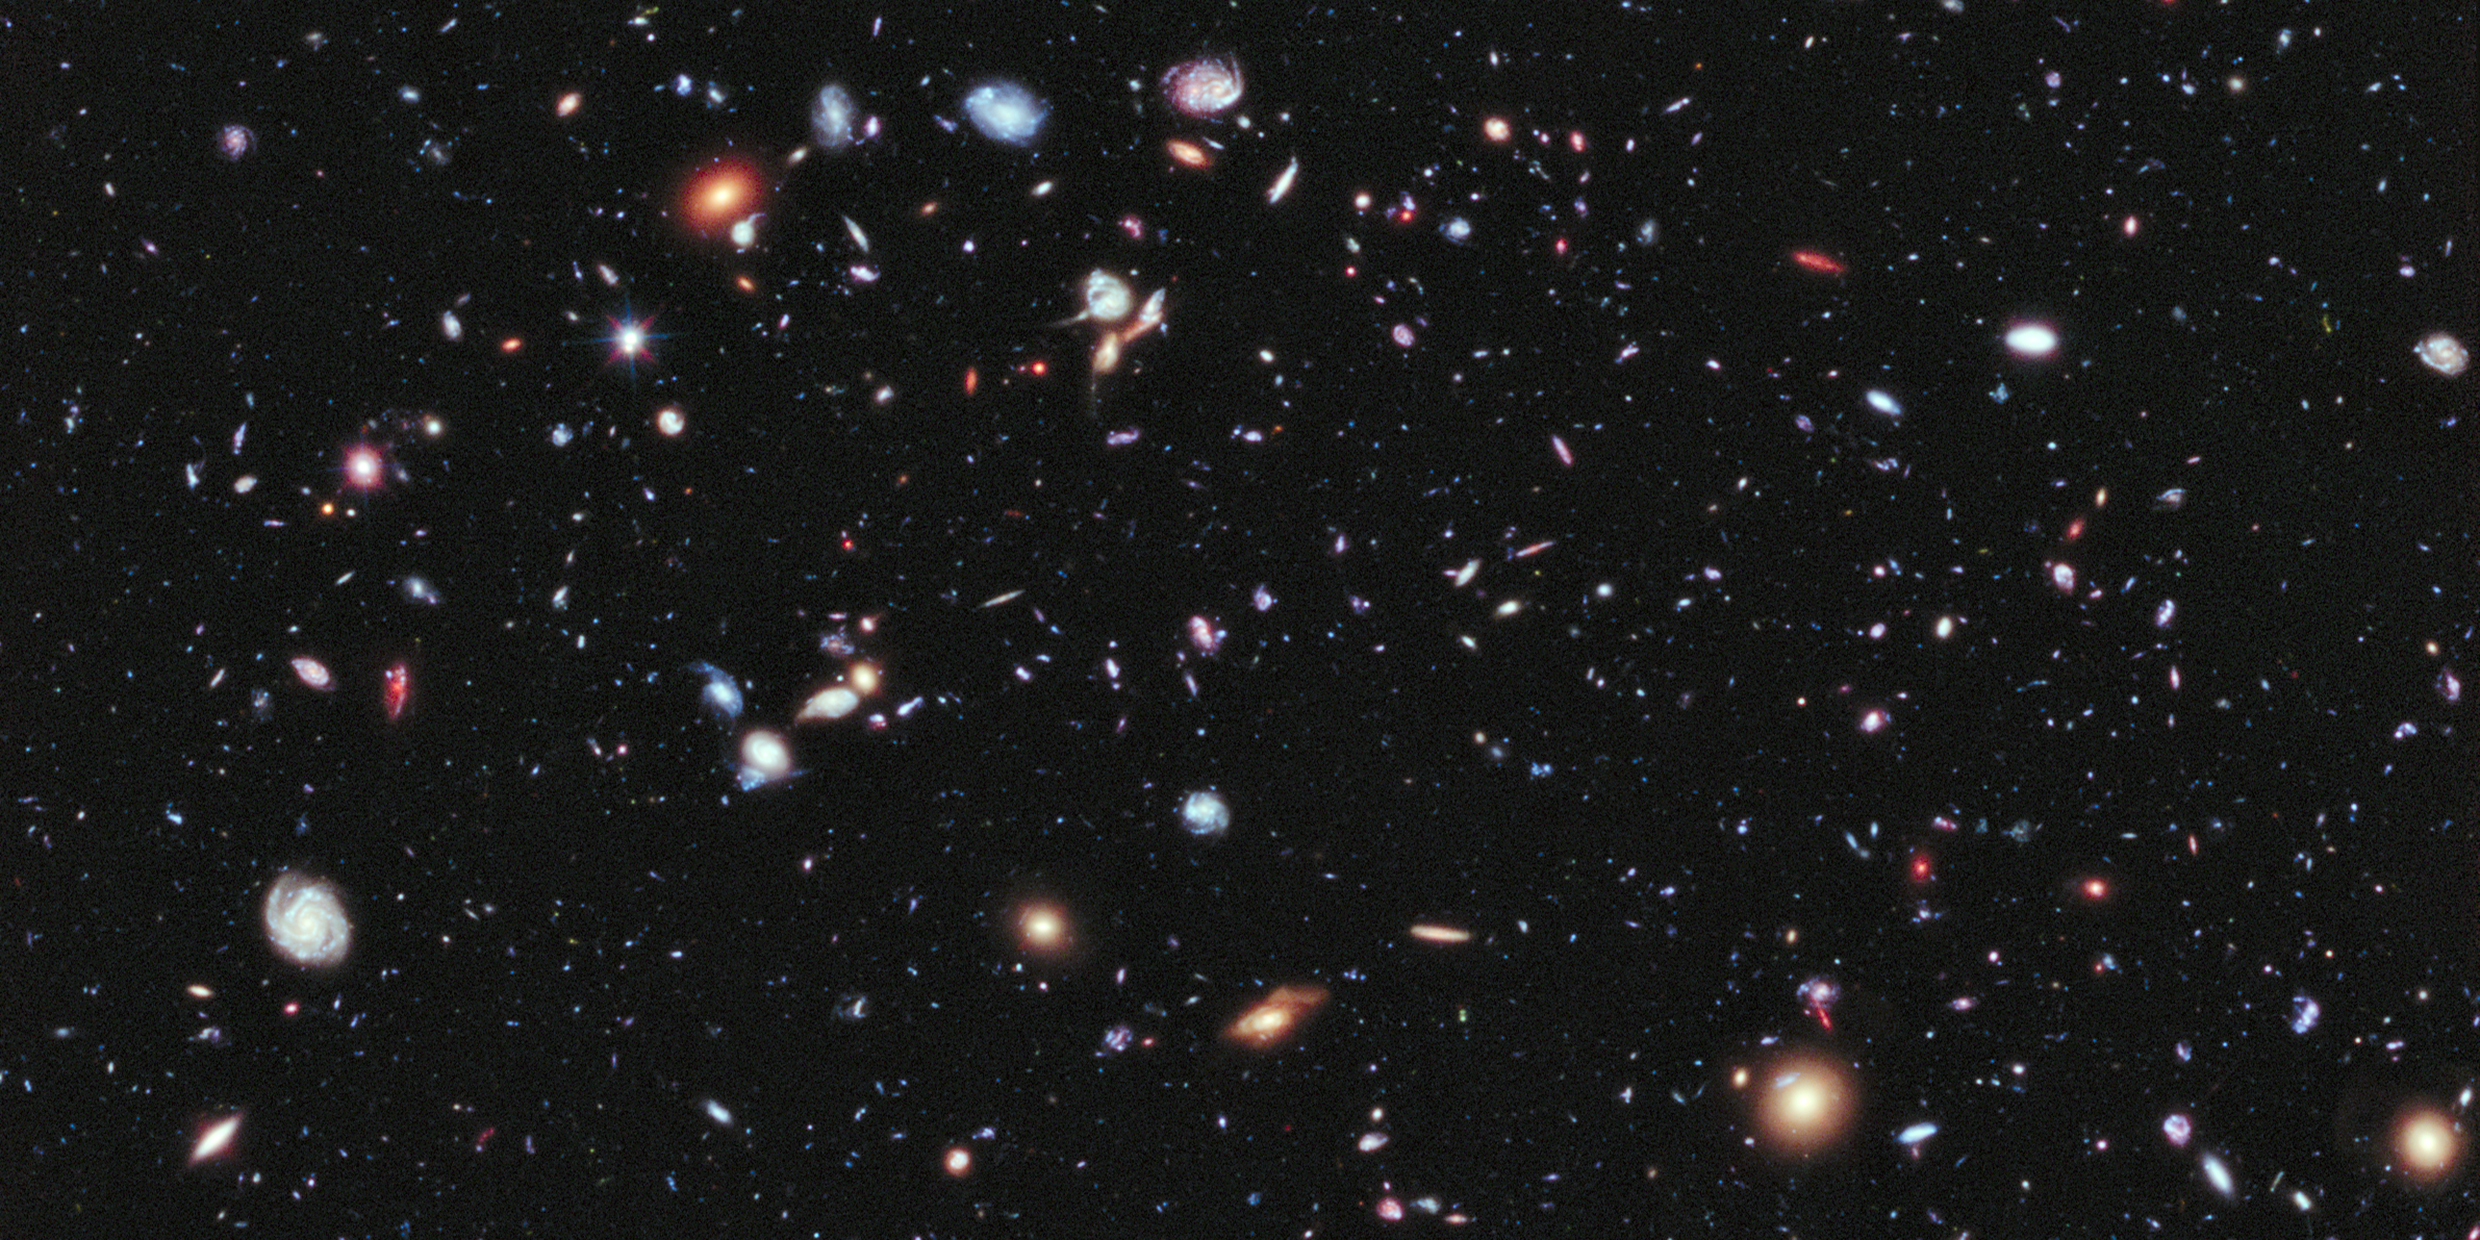 Image of thousands of galaxies in space